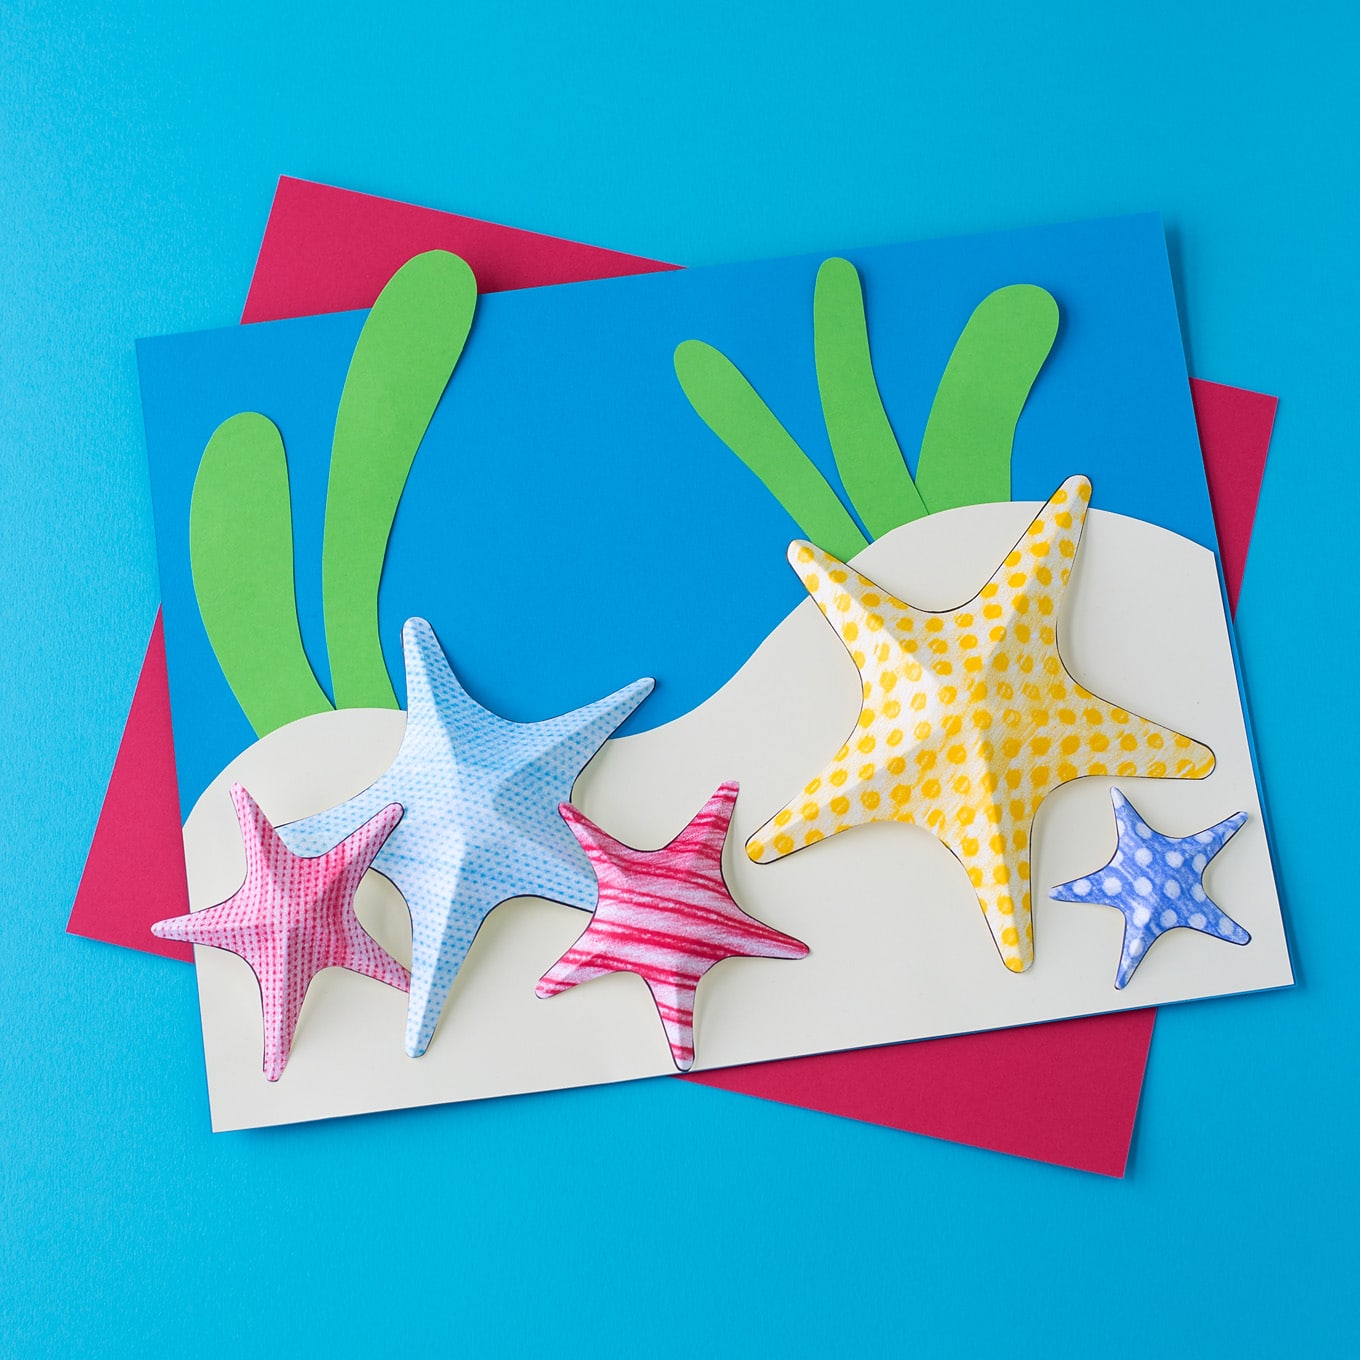 Super Easy To Make Pipe Cleaner Starfish